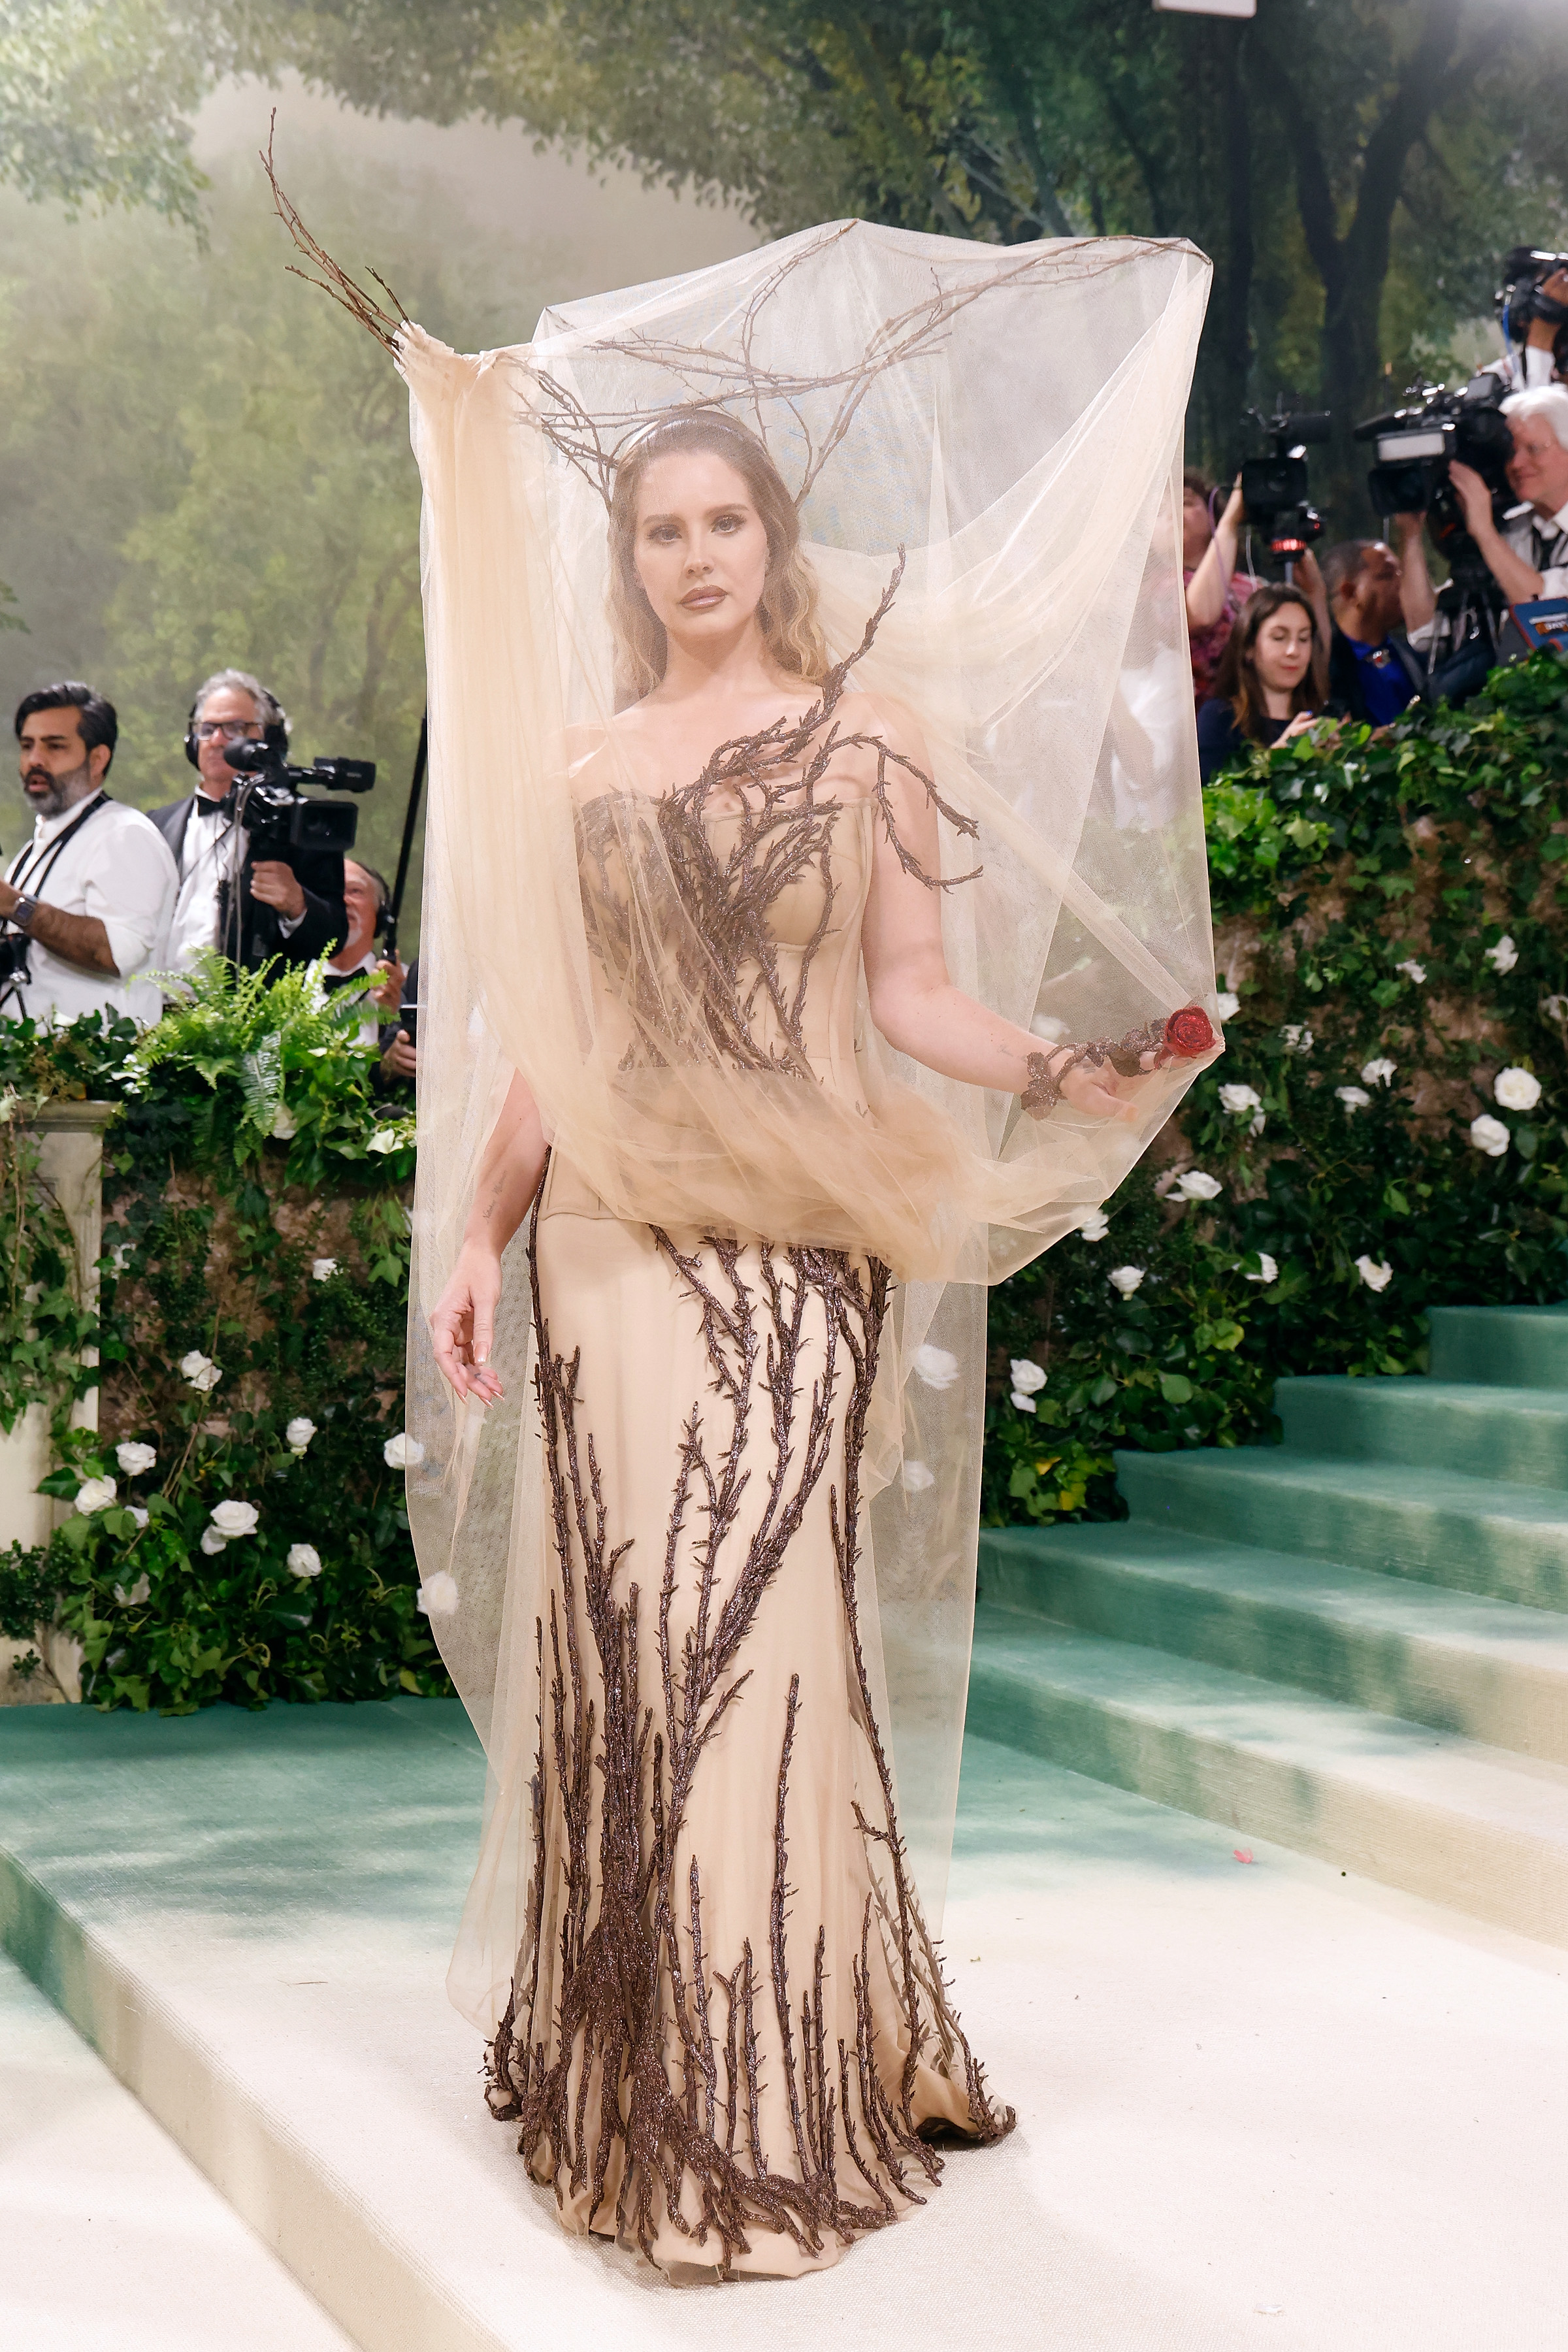 Lana donned an Alexander McQueen-inspired look for the Met Gala